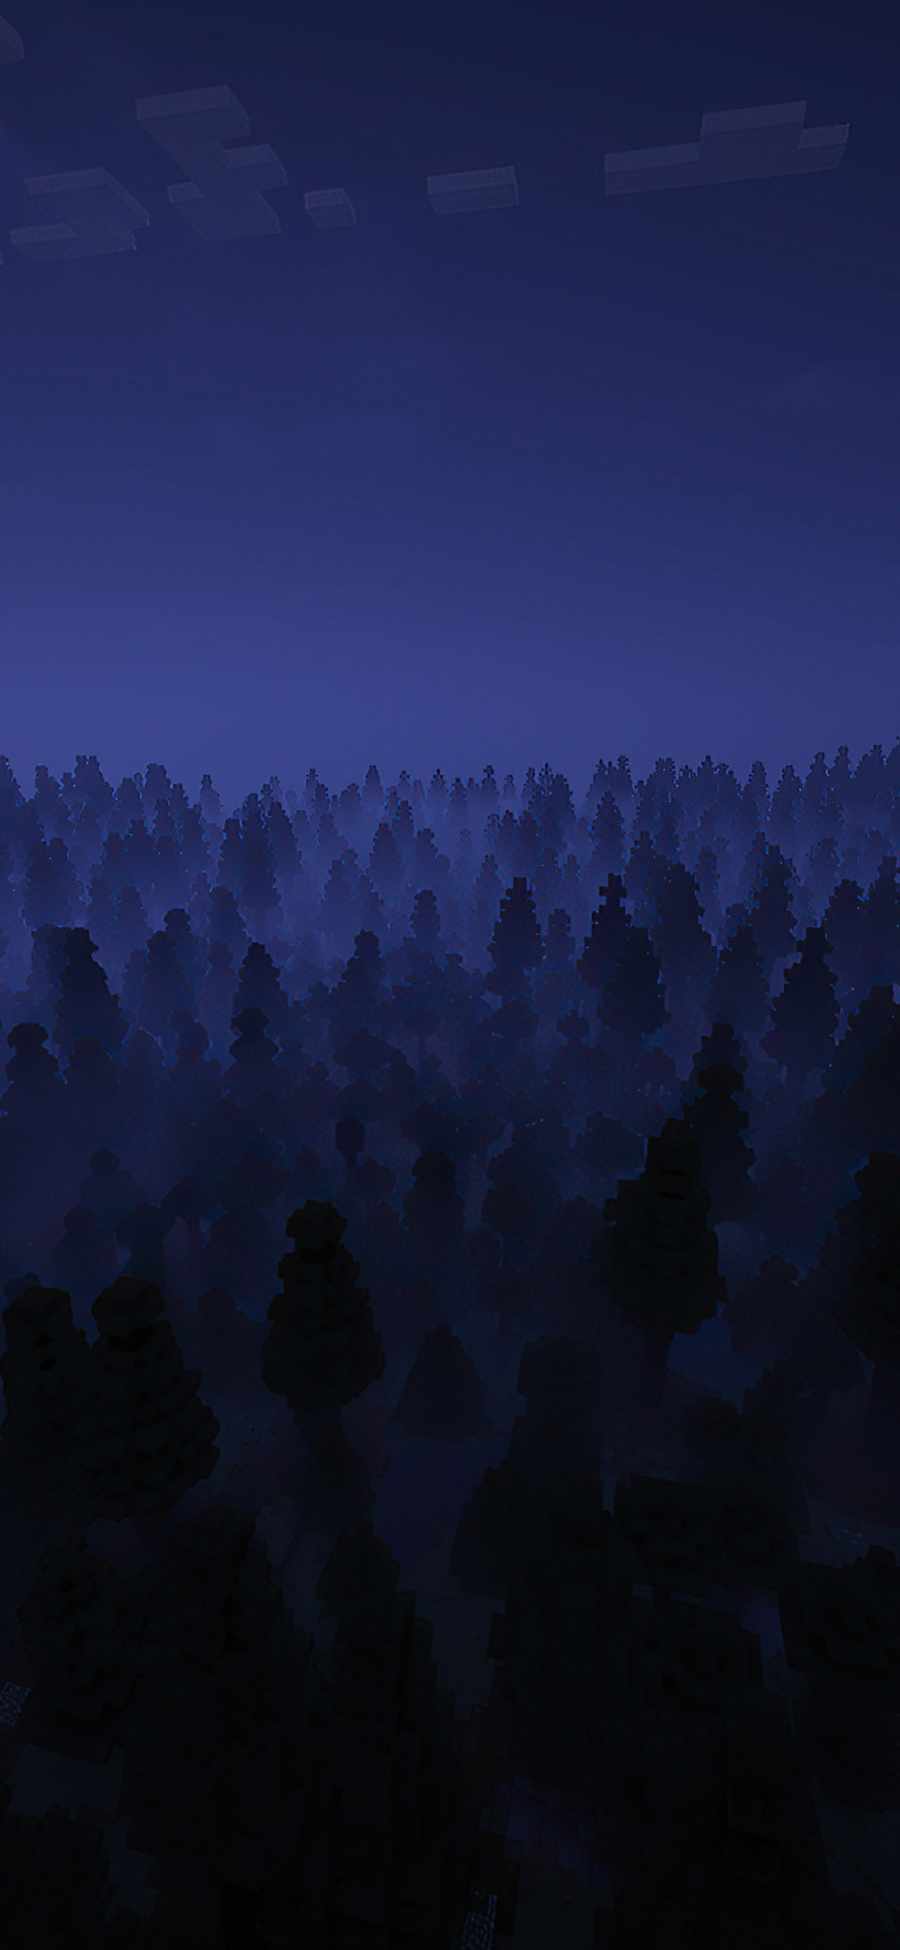 Blue Fog Over The Dark Forest IPhone Wallpaper - IPhone Wallpapers : iPhone  Wallpapers